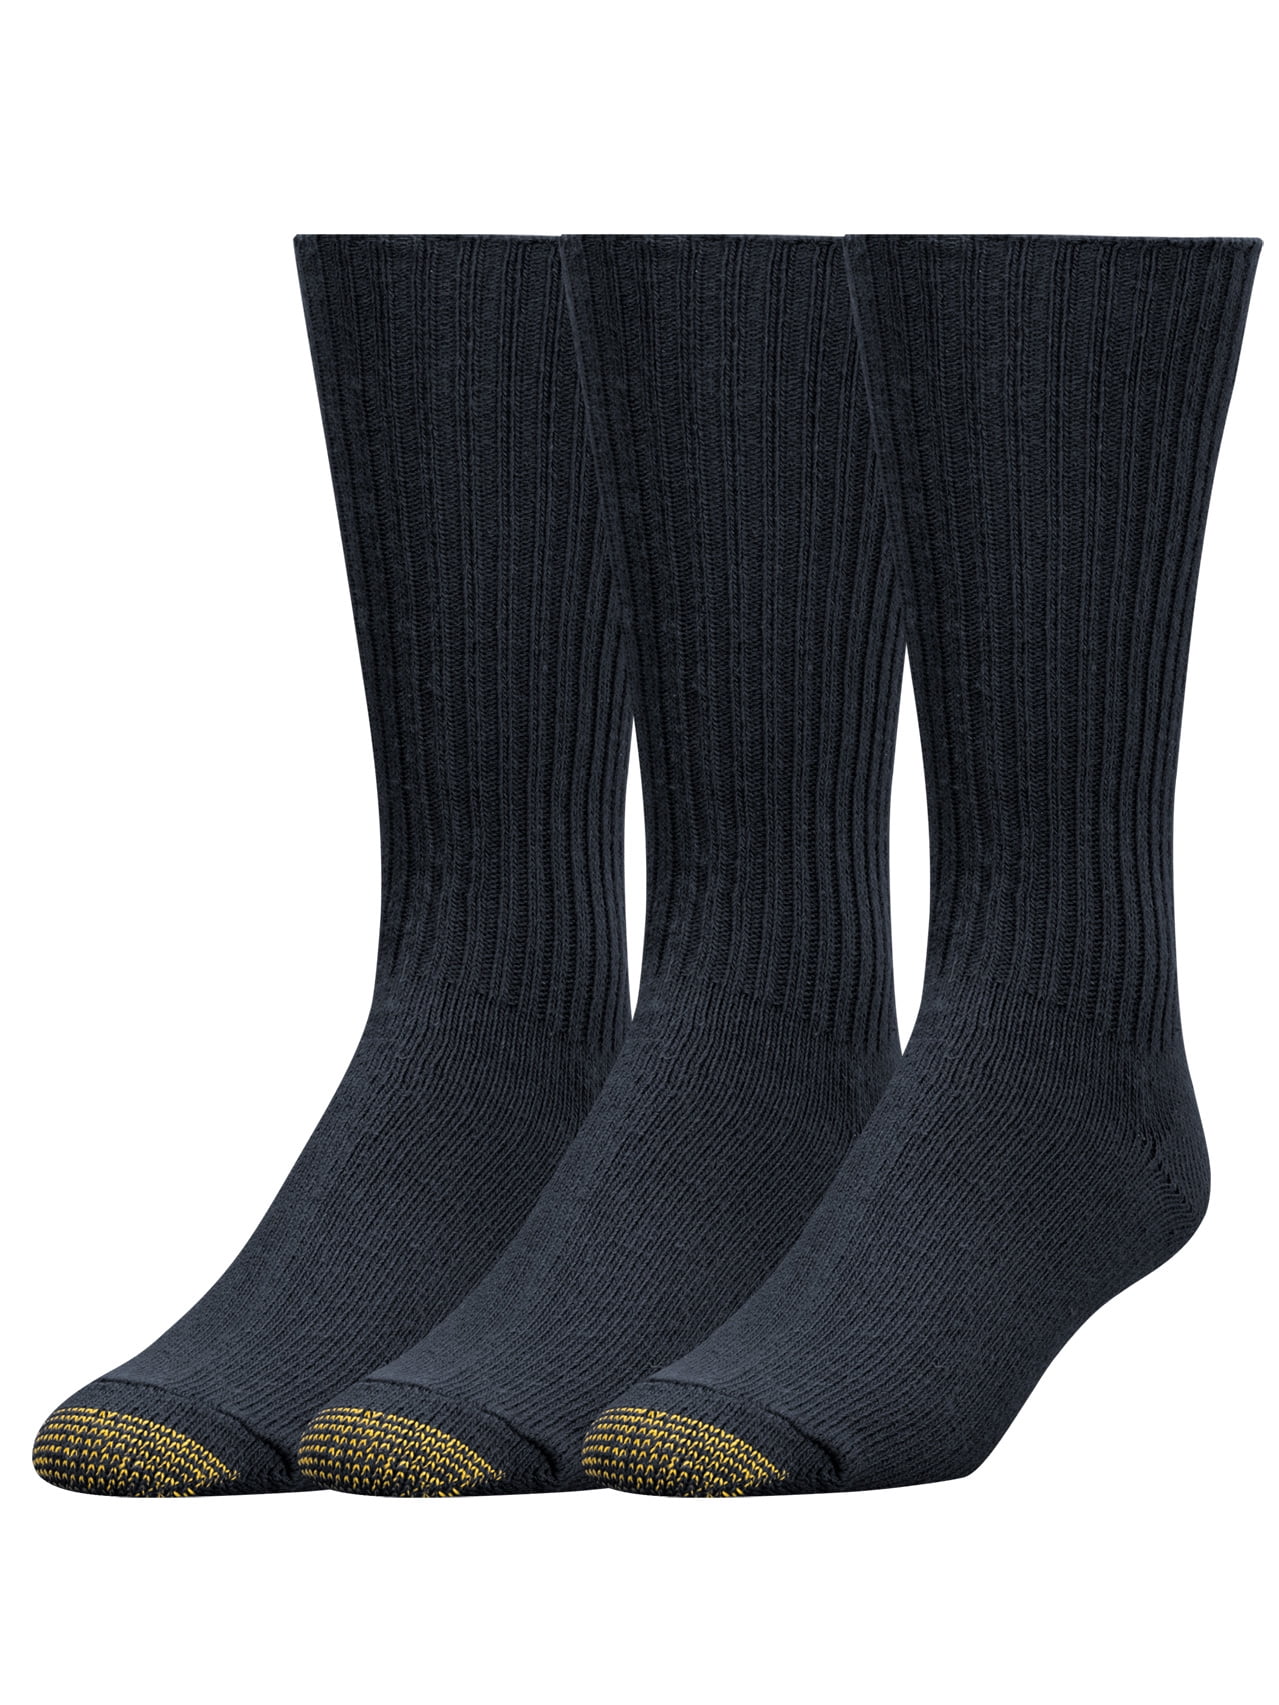 3 Pairs Gold Toe Men's Cotton Fluffies Casual Socks Assorted Colors 